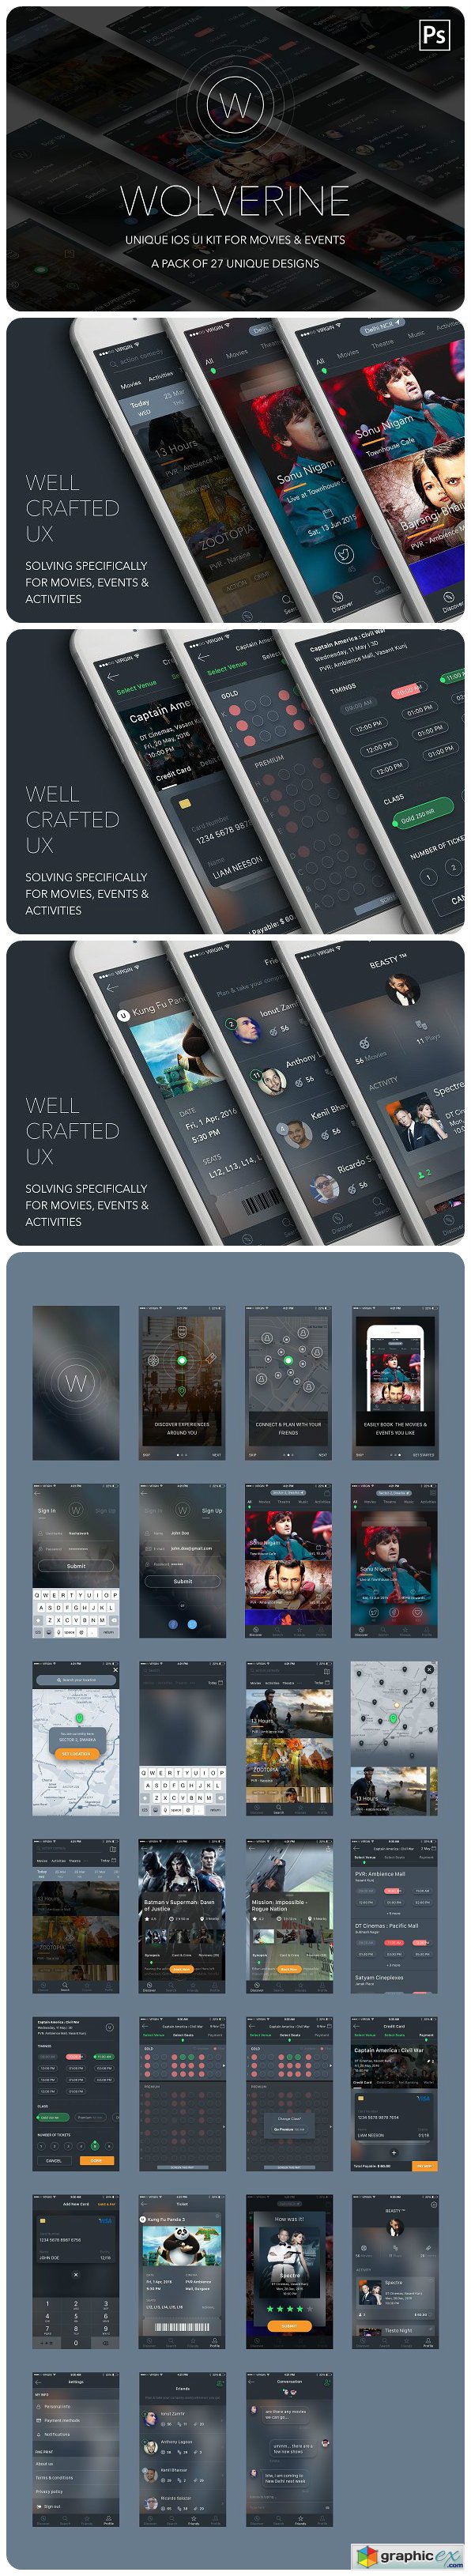 Wolverine IOS UI KIT for activities